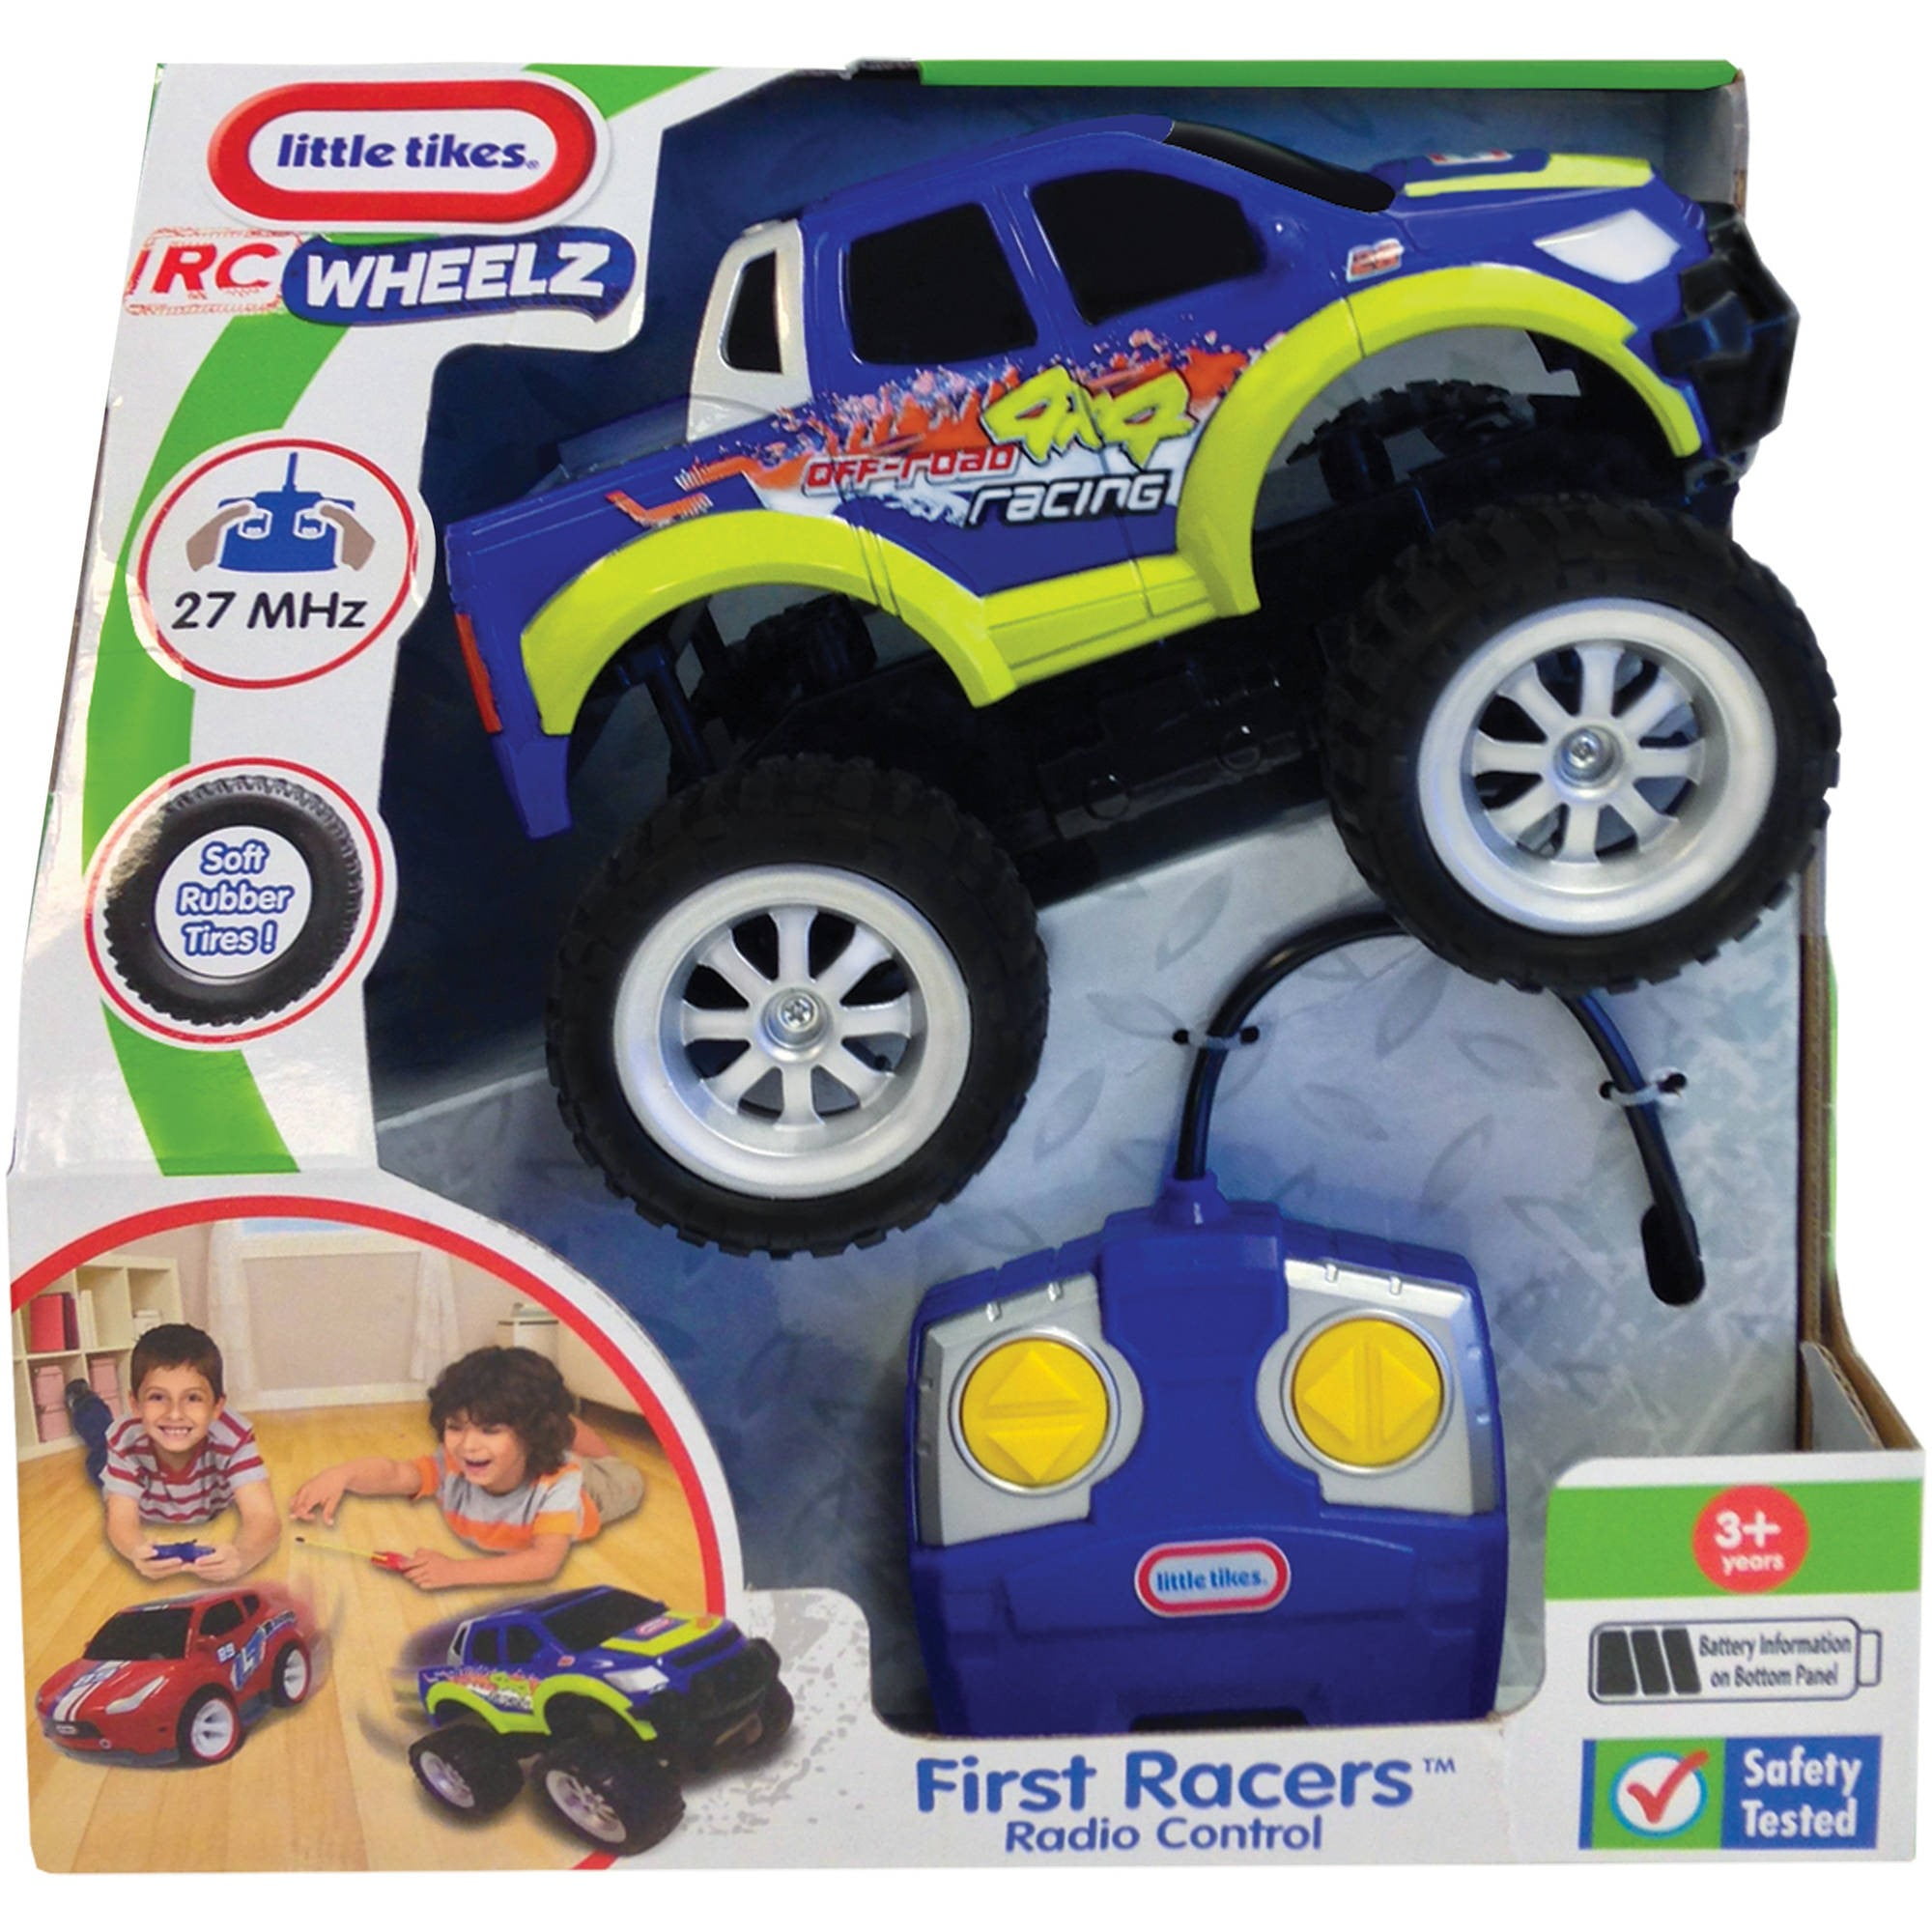 Little Tikes RC Wheelz First Racers 